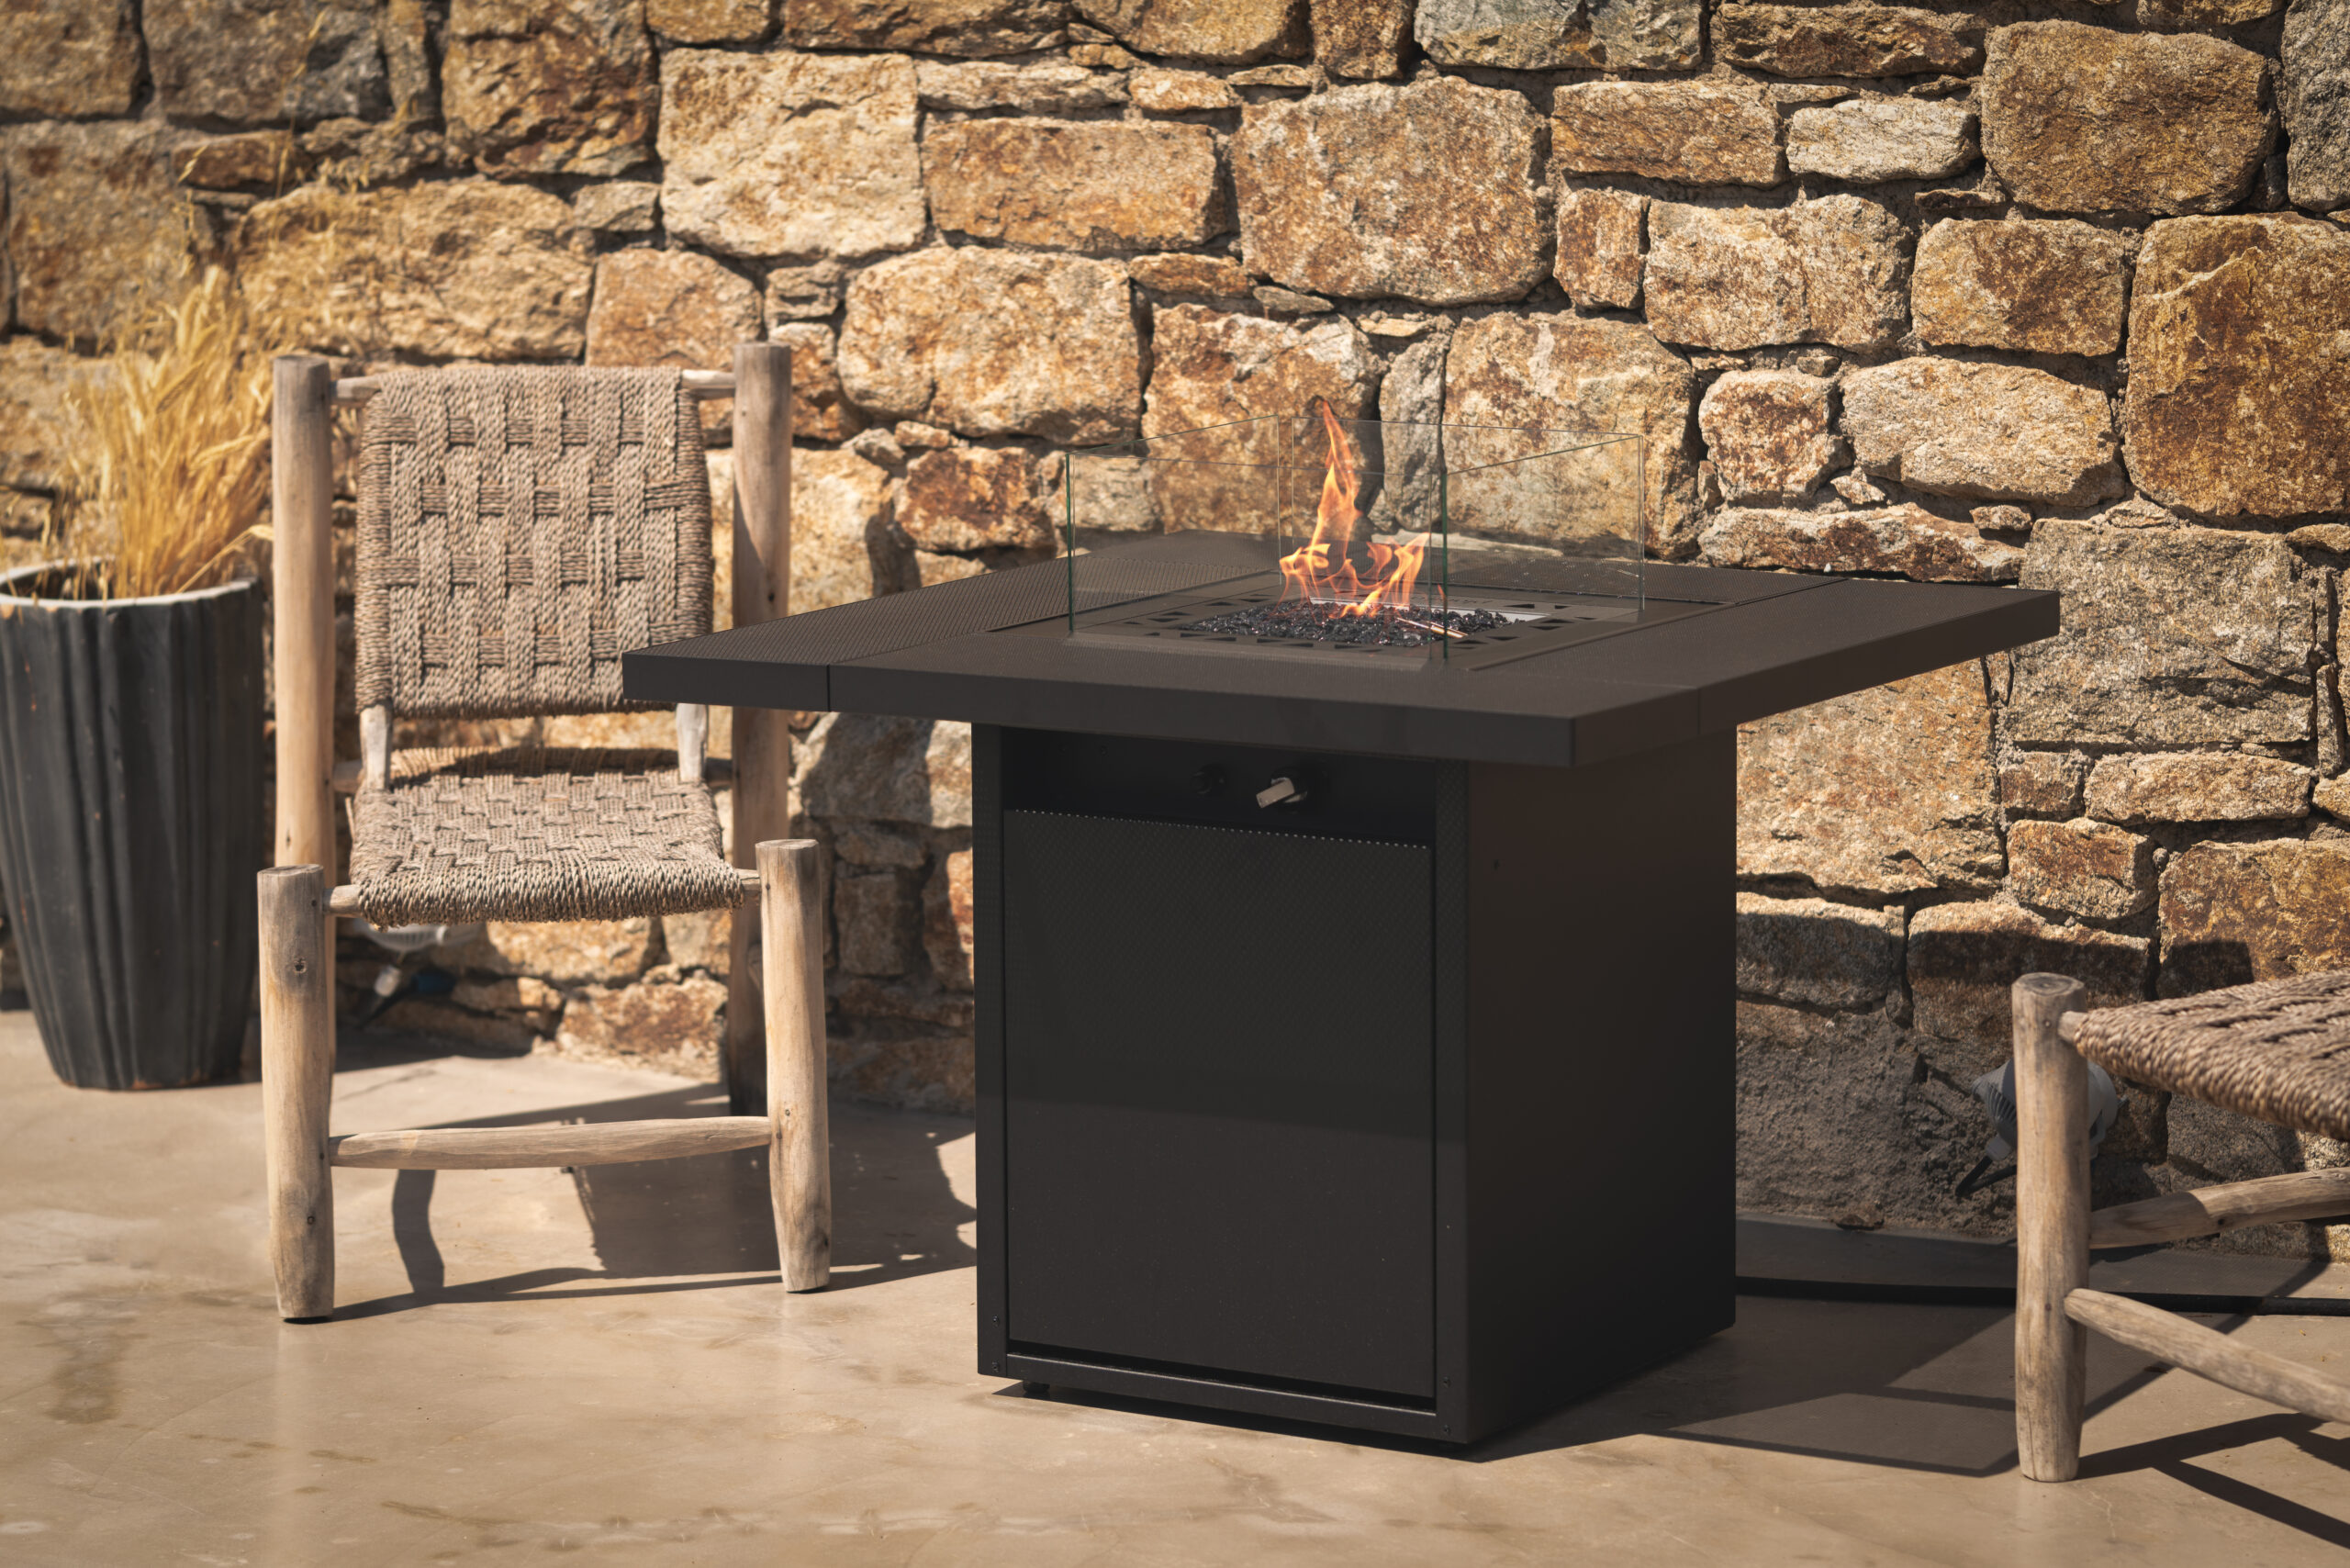 Outdoor Gas Fire Pit Square Table is a fire table that can serve as a functional garden furniture